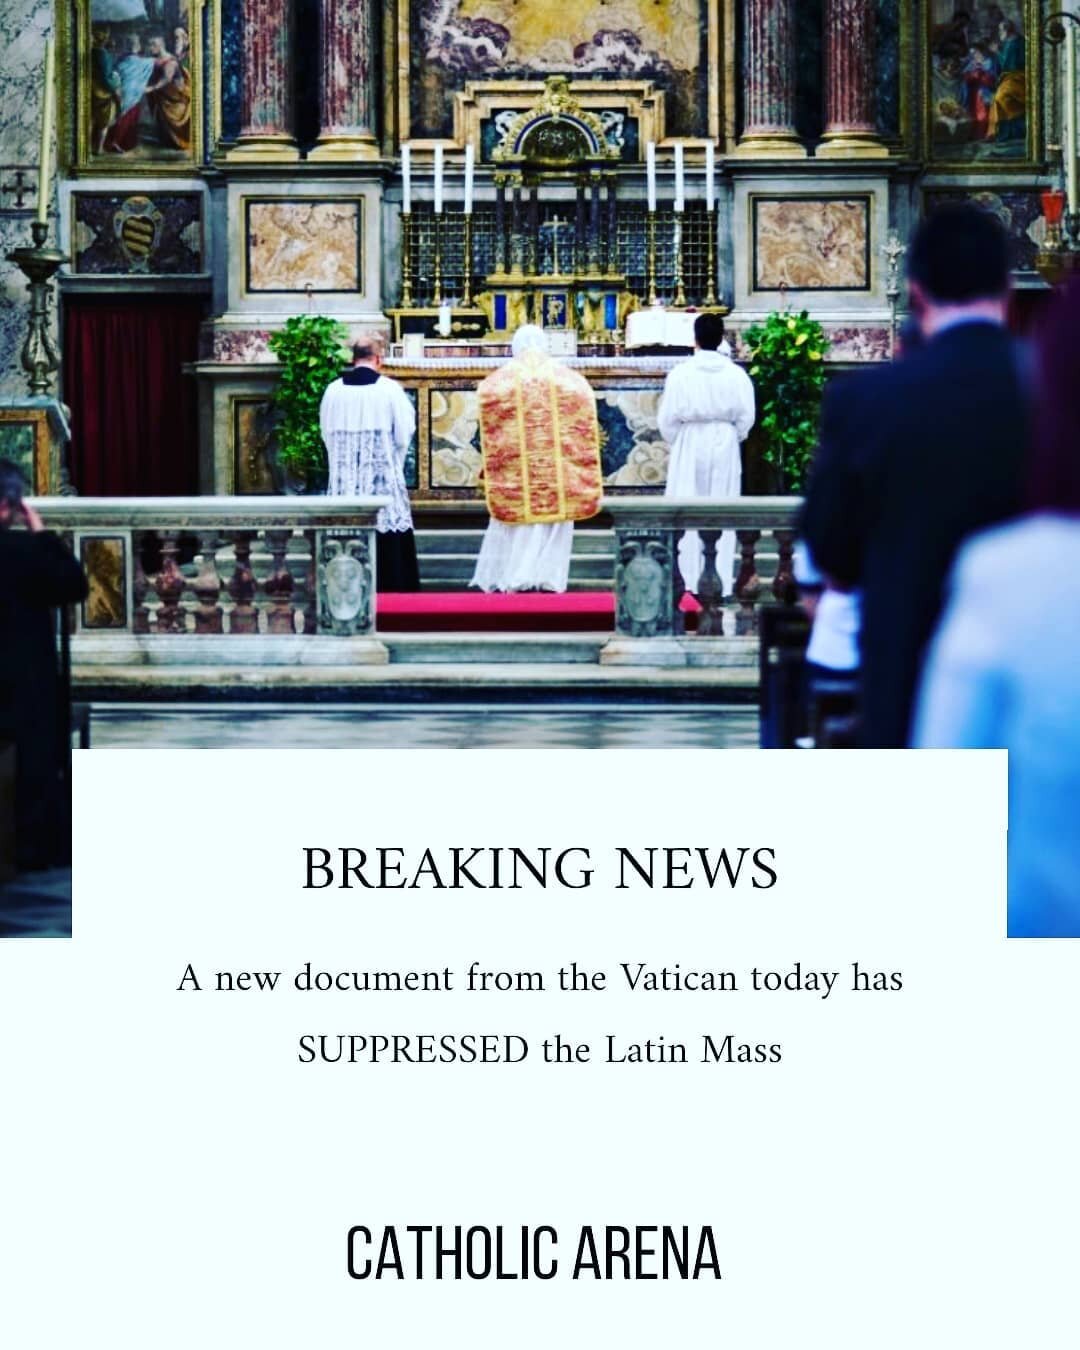 BREAKING 

The Latin Mass has been suppressed. 

Link in bio. 

#catholic #jesus #christian #faith #church #latinmass #francis #tradition #vatican